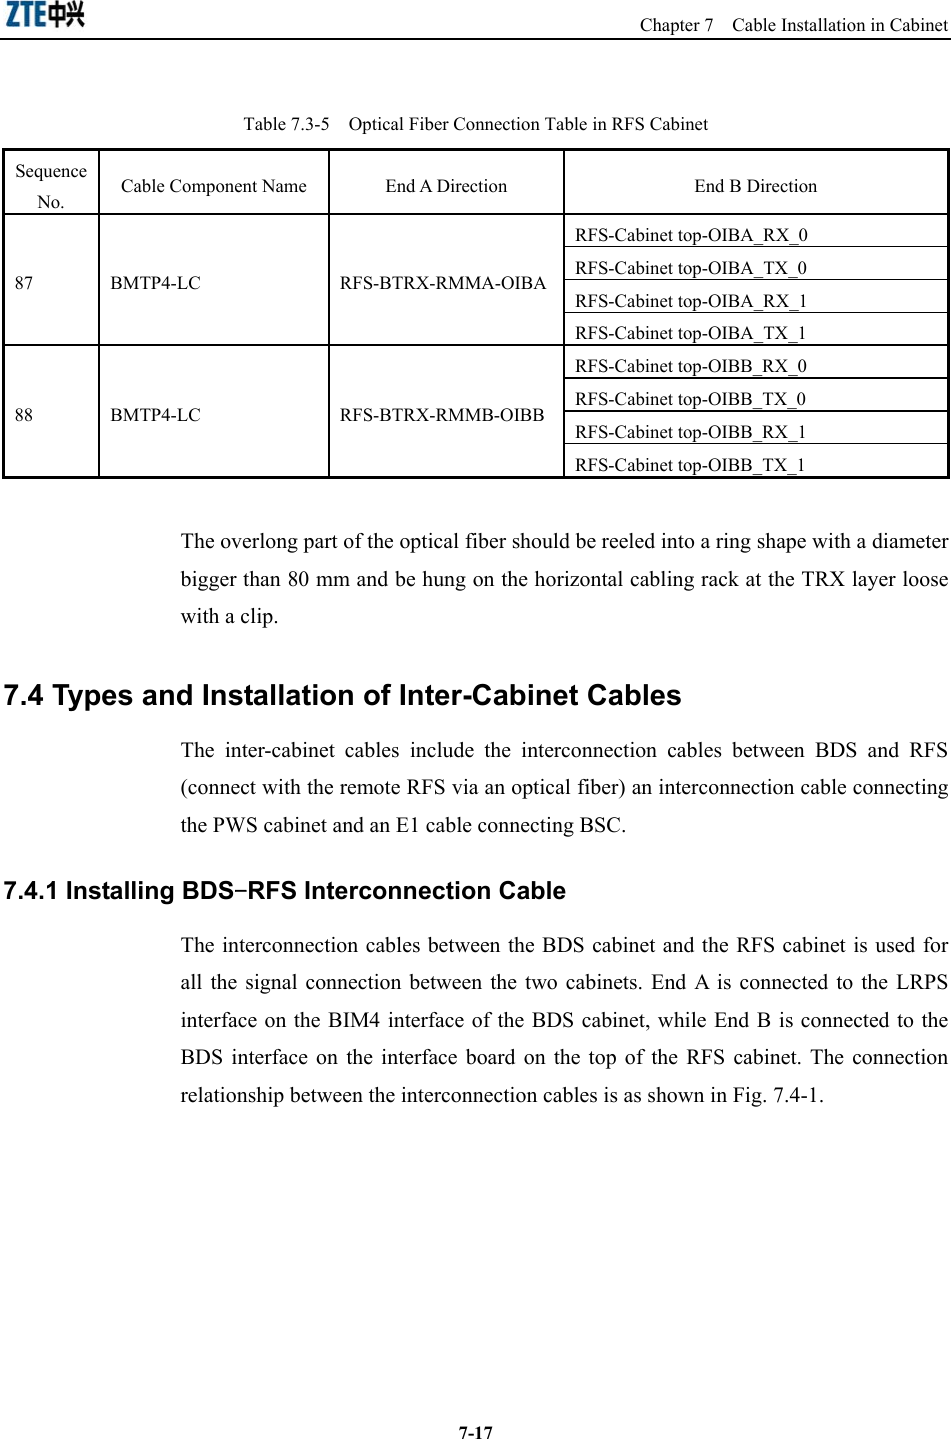                                                            Chapter 7  Cable Installation in Cabinet  7-17Table 7.3-5    Optical Fiber Connection Table in RFS Cabinet Sequence No.  Cable Component Name  End A Direction  End B Direction RFS-Cabinet top-OIBA_RX_0 RFS-Cabinet top-OIBA_TX_0   RFS-Cabinet top-OIBA_RX_1 87 BMTP4-LC  RFS-BTRX-RMMA-OIBARFS-Cabinet top-OIBA_TX_1   RFS-Cabinet top-OIBB_RX_0   RFS-Cabinet top-OIBB_TX_0   RFS-Cabinet top-OIBB_RX_1   88 BMTP4-LC  RFS-BTRX-RMMB-OIBBRFS-Cabinet top-OIBB_TX_1   The overlong part of the optical fiber should be reeled into a ring shape with a diameter bigger than 80 mm and be hung on the horizontal cabling rack at the TRX layer loose with a clip.   7.4 Types and Installation of Inter-Cabinet Cables The inter-cabinet cables include the interconnection cables between BDS and RFS (connect with the remote RFS via an optical fiber) an interconnection cable connecting the PWS cabinet and an E1 cable connecting BSC.   7.4.1 Installing BDS-RFS Interconnection Cable   The interconnection cables between the BDS cabinet and the RFS cabinet is used for all the signal connection between the two cabinets. End A is connected to the LRPS interface on the BIM4 interface of the BDS cabinet, while End B is connected to the BDS interface on the interface board on the top of the RFS cabinet. The connection relationship between the interconnection cables is as shown in Fig. 7.4-1.   